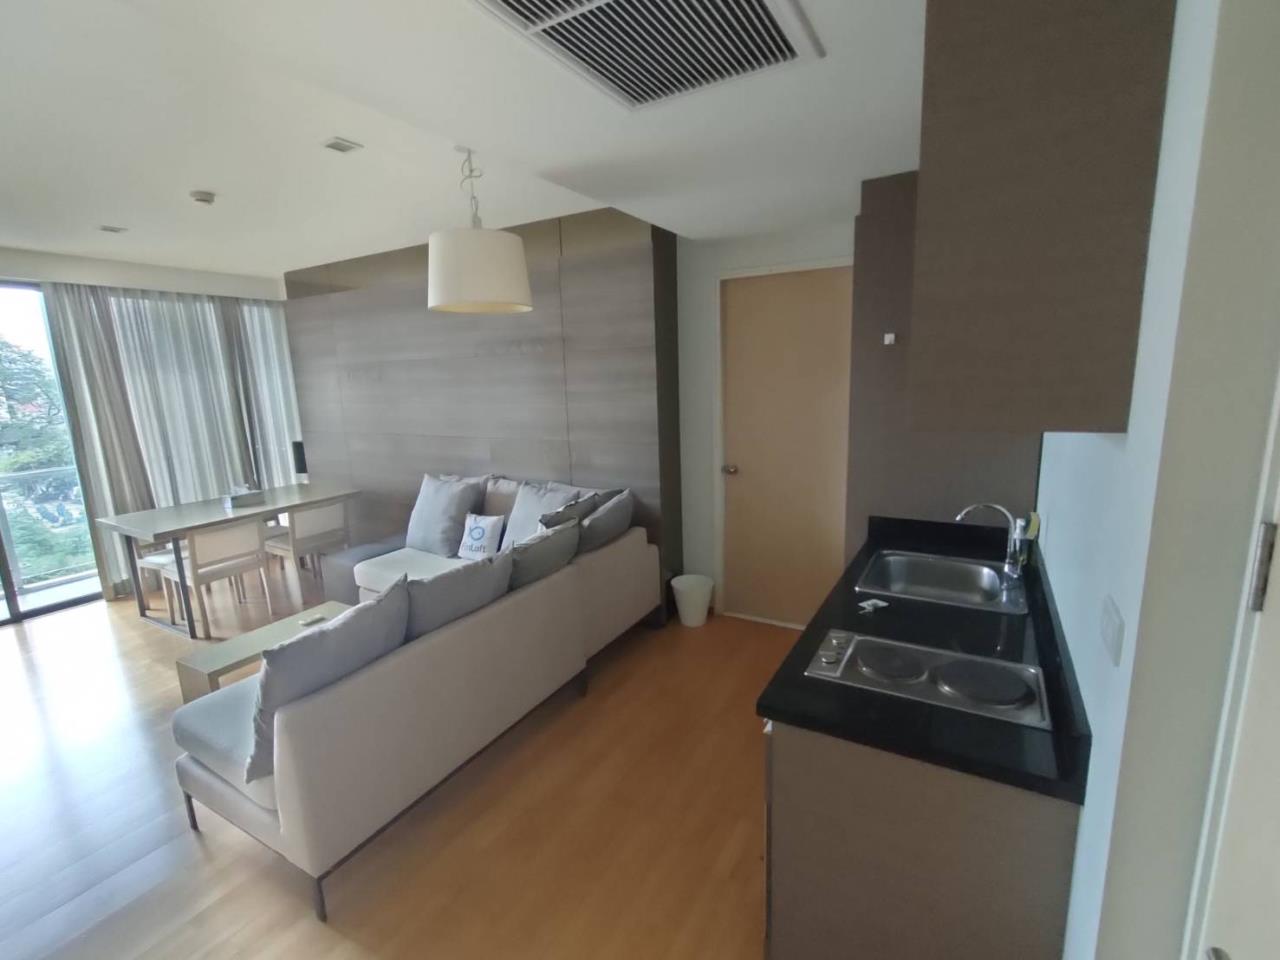 Bestbkkcondos Agency's 2Bedrooms | 2Bathrooms | 80sqm | Issara@42 | Rent 35,000 THB / Month Negotiable 6